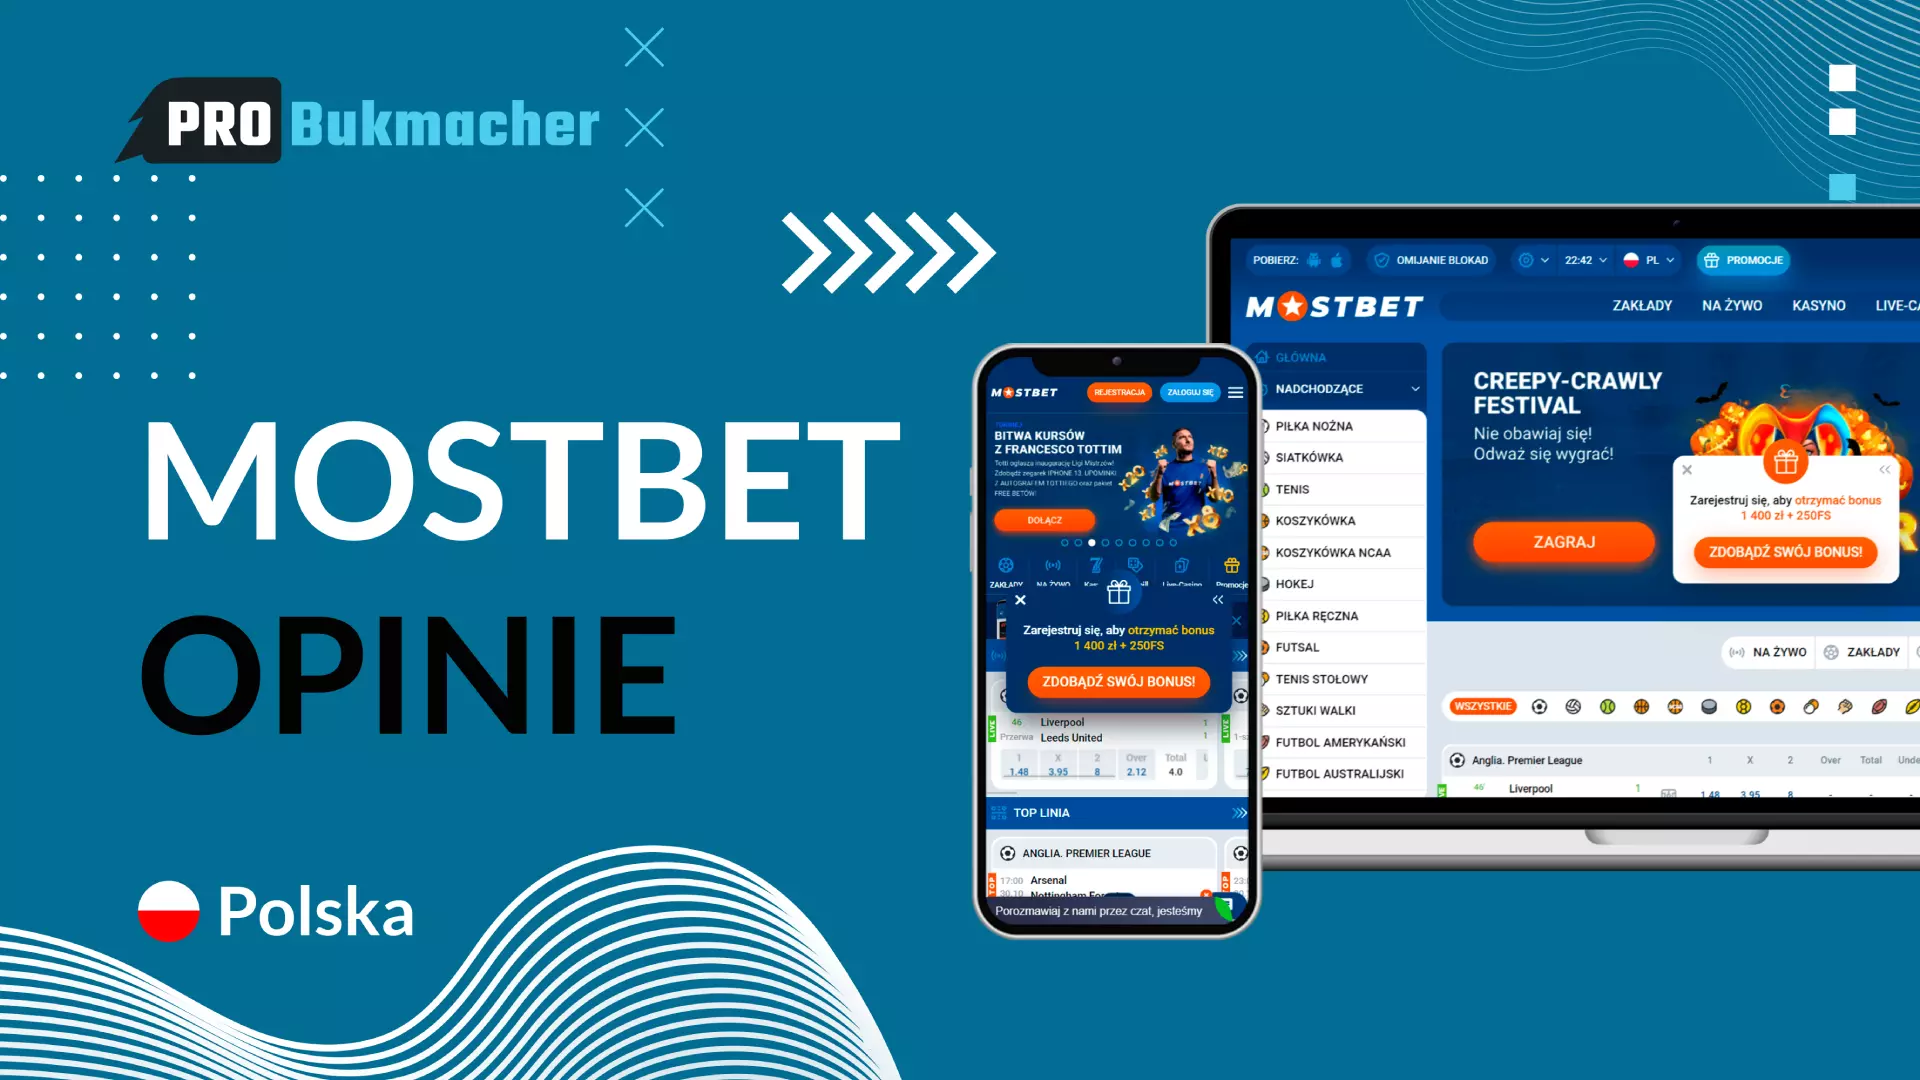 What Do You Want Mostbet Online Casino Games Company To Become?